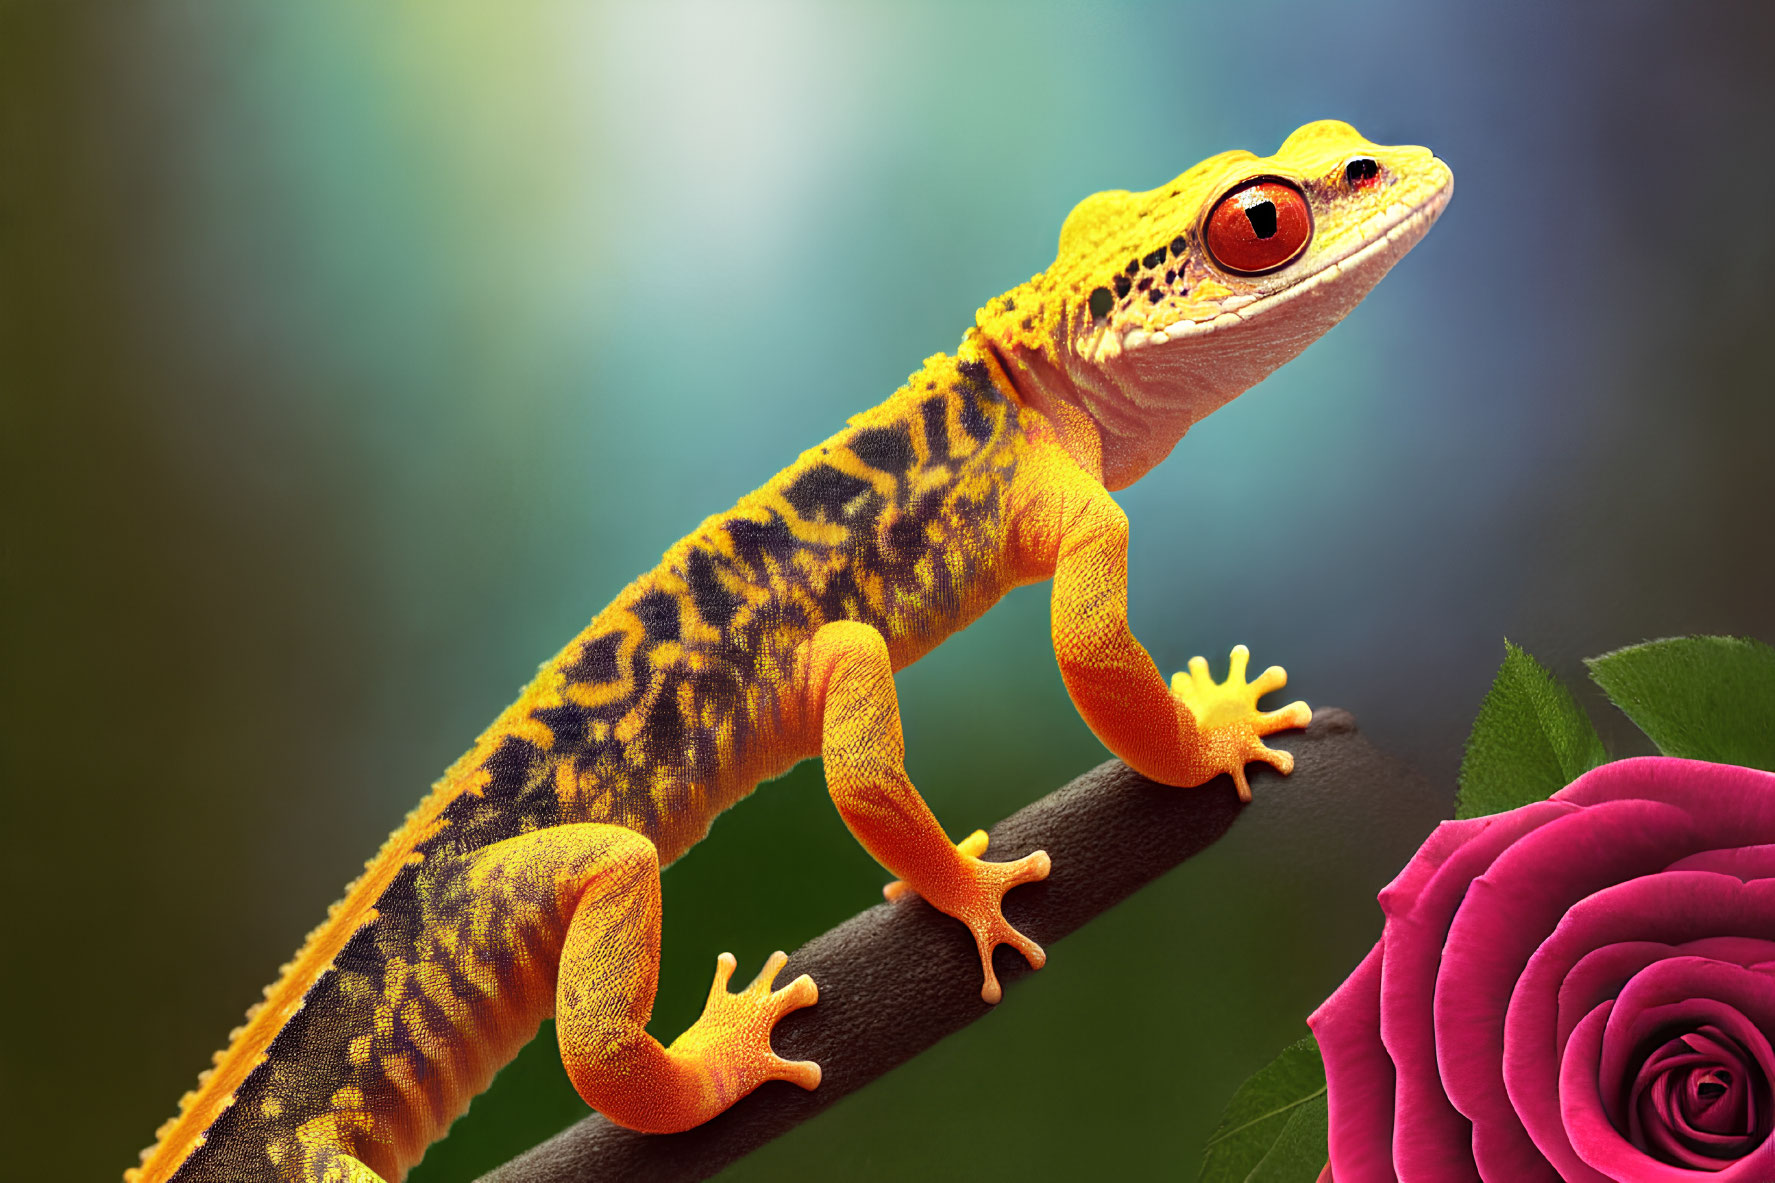 Colorful Yellow Gecko on Branch with Pink Rose and Blurred Green Background